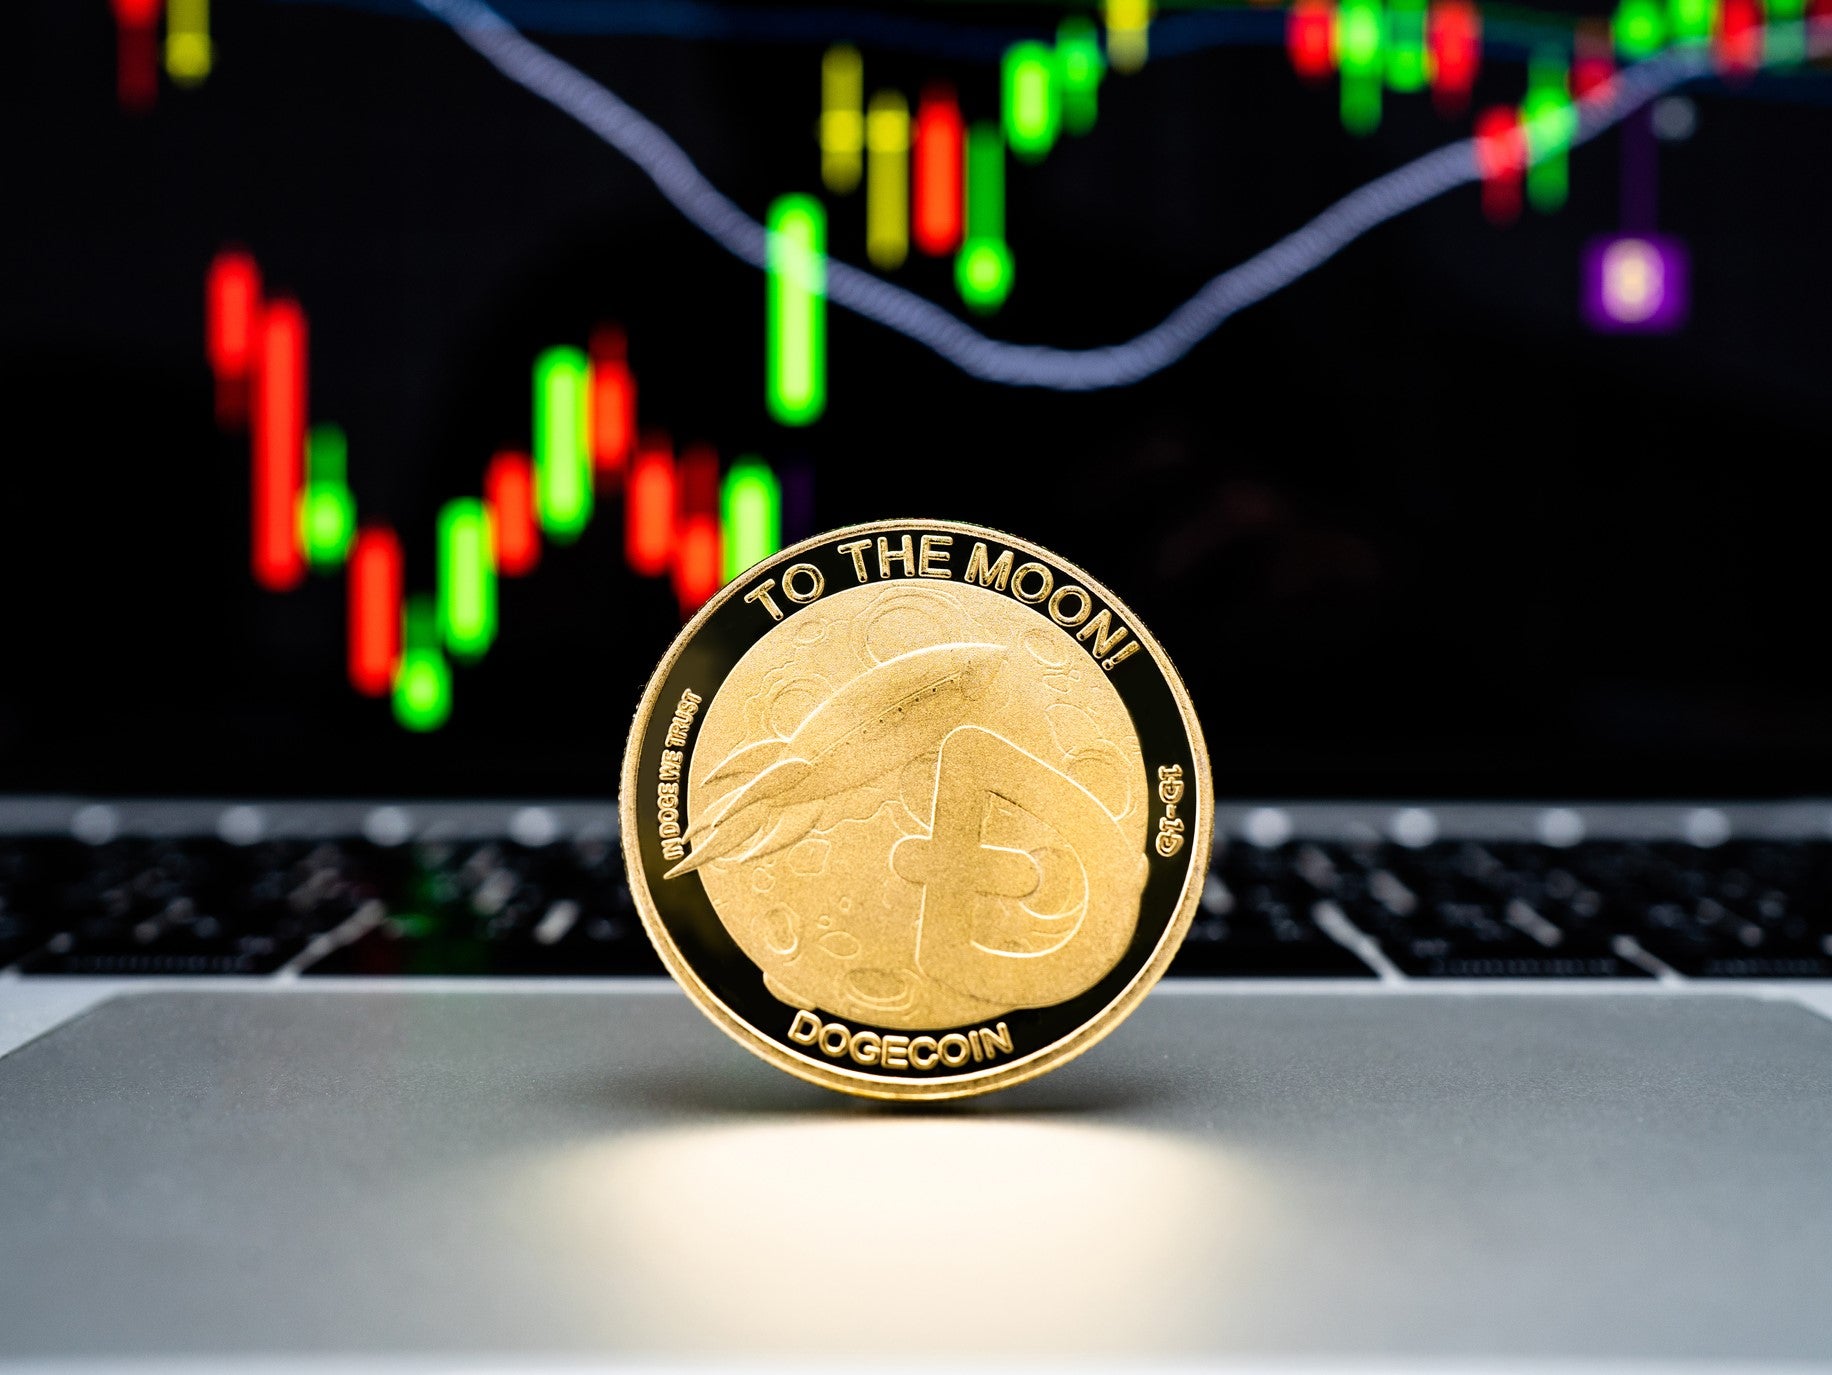 The price of dogecoin peaked in May but fell dramatically, losing around 75 per cent of its value by 22 June, 2021